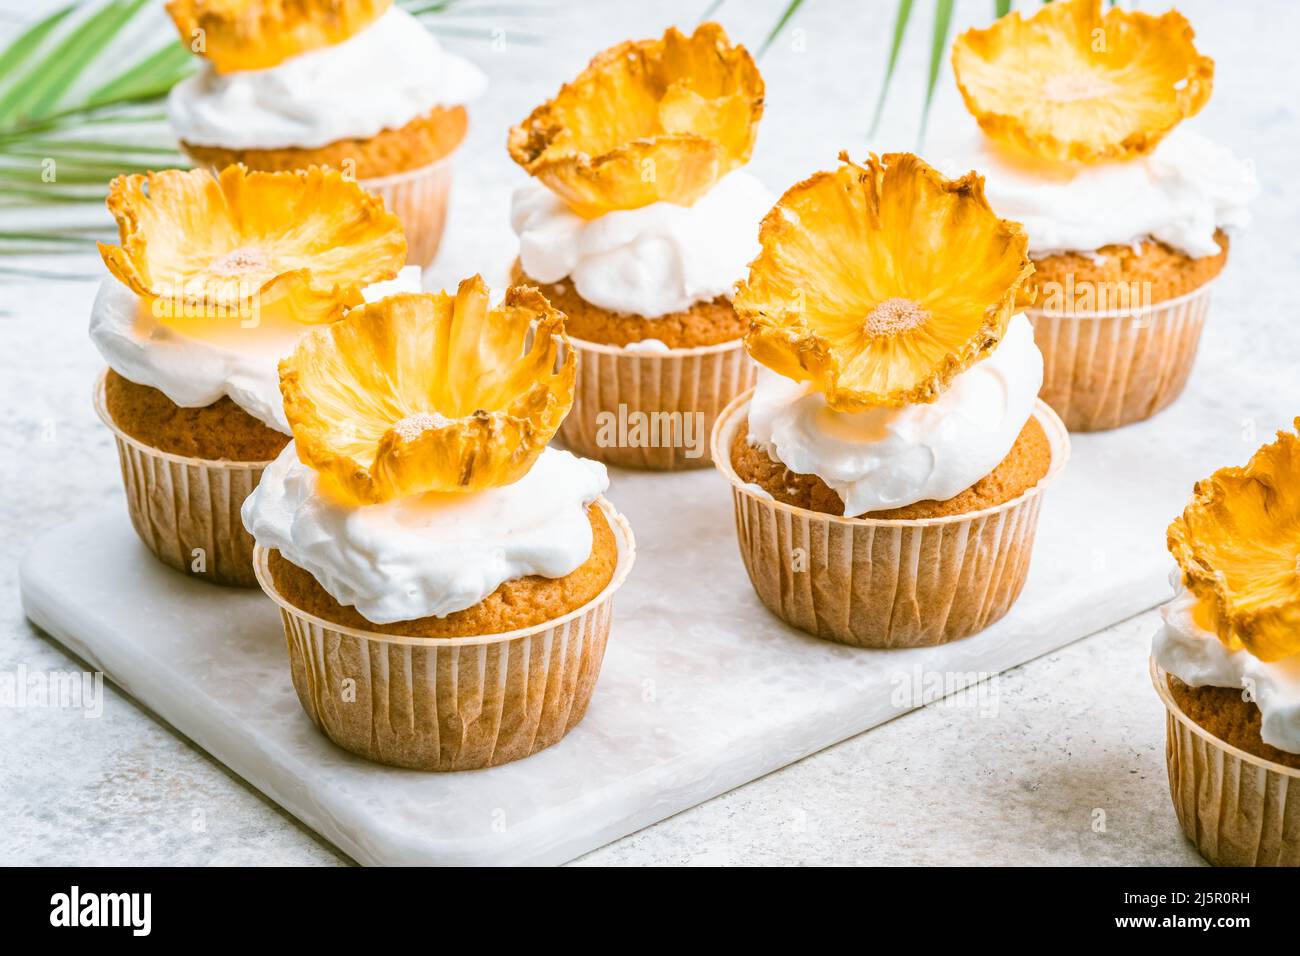 Cupcakes with dried pineapple flowers Stock Photo